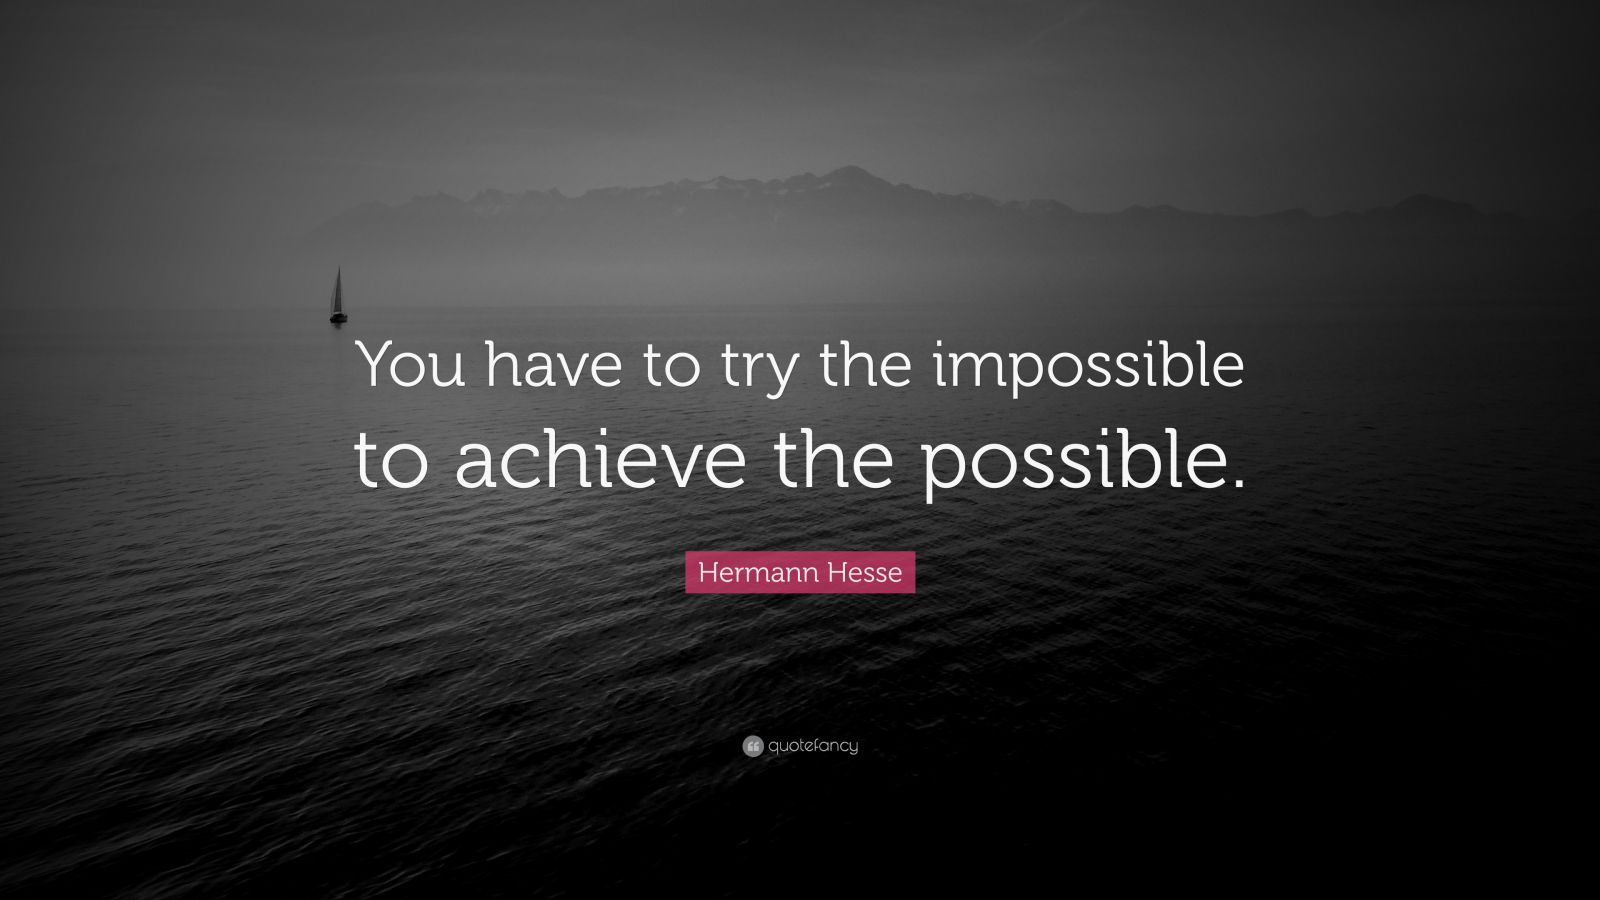 Hermann Hesse Quote: “You have to try the impossible to achieve the ...